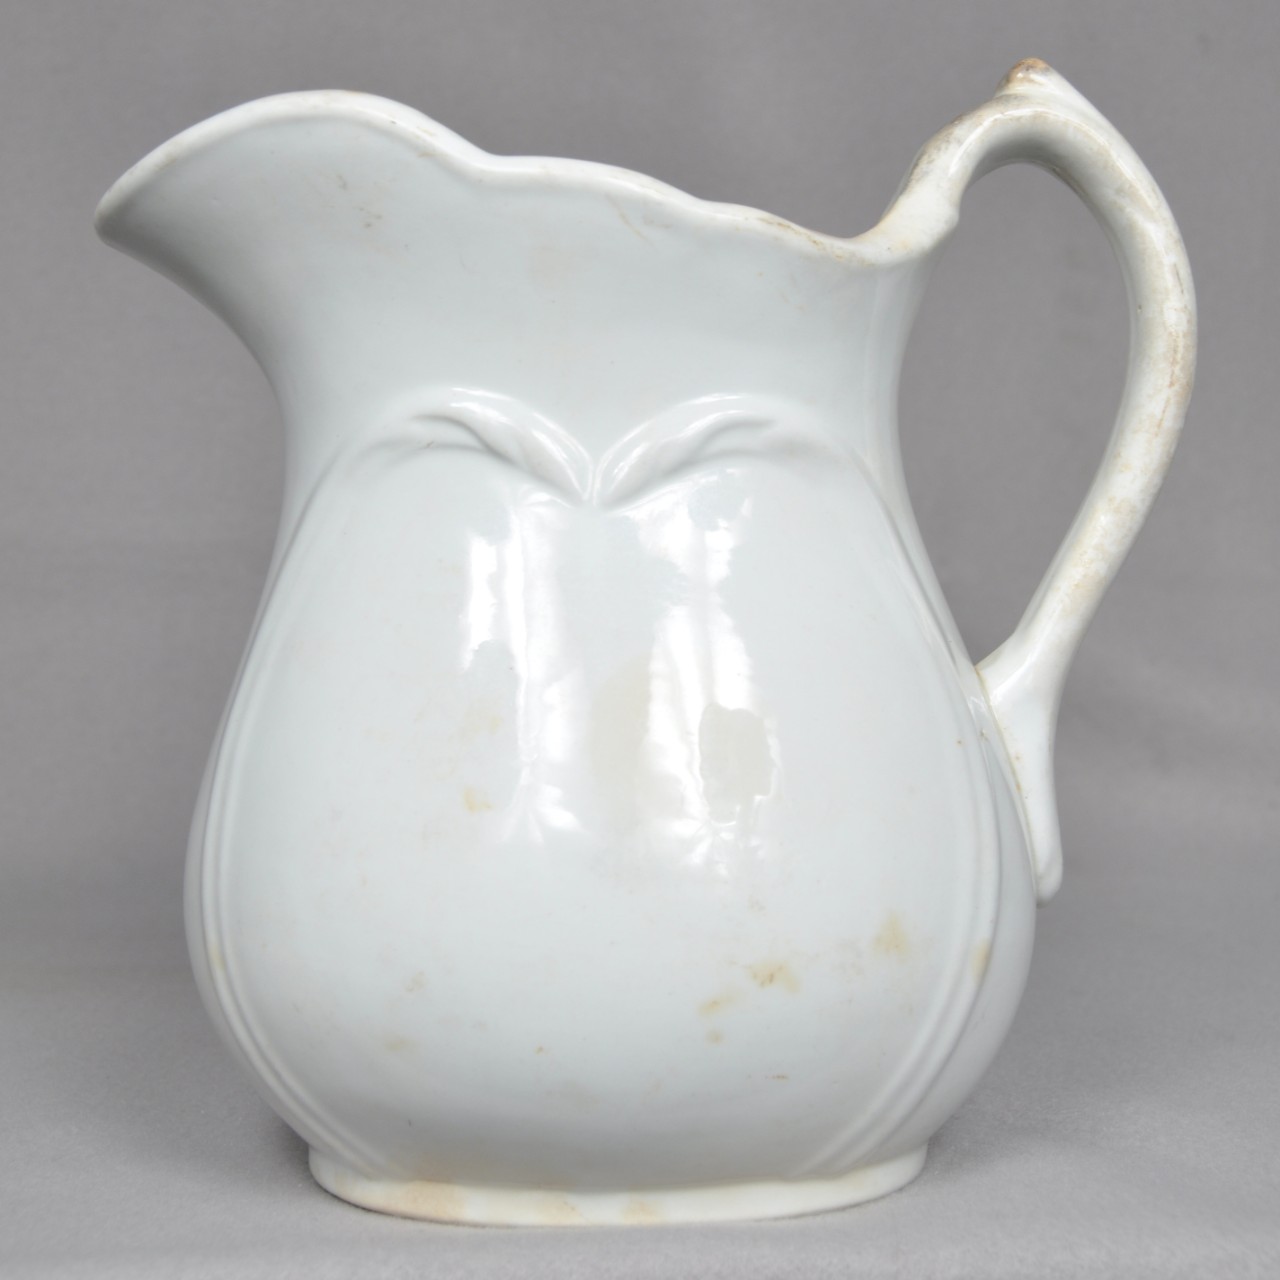 <p>A white ceramic pitcher with decorative molding on both sides.</p>
